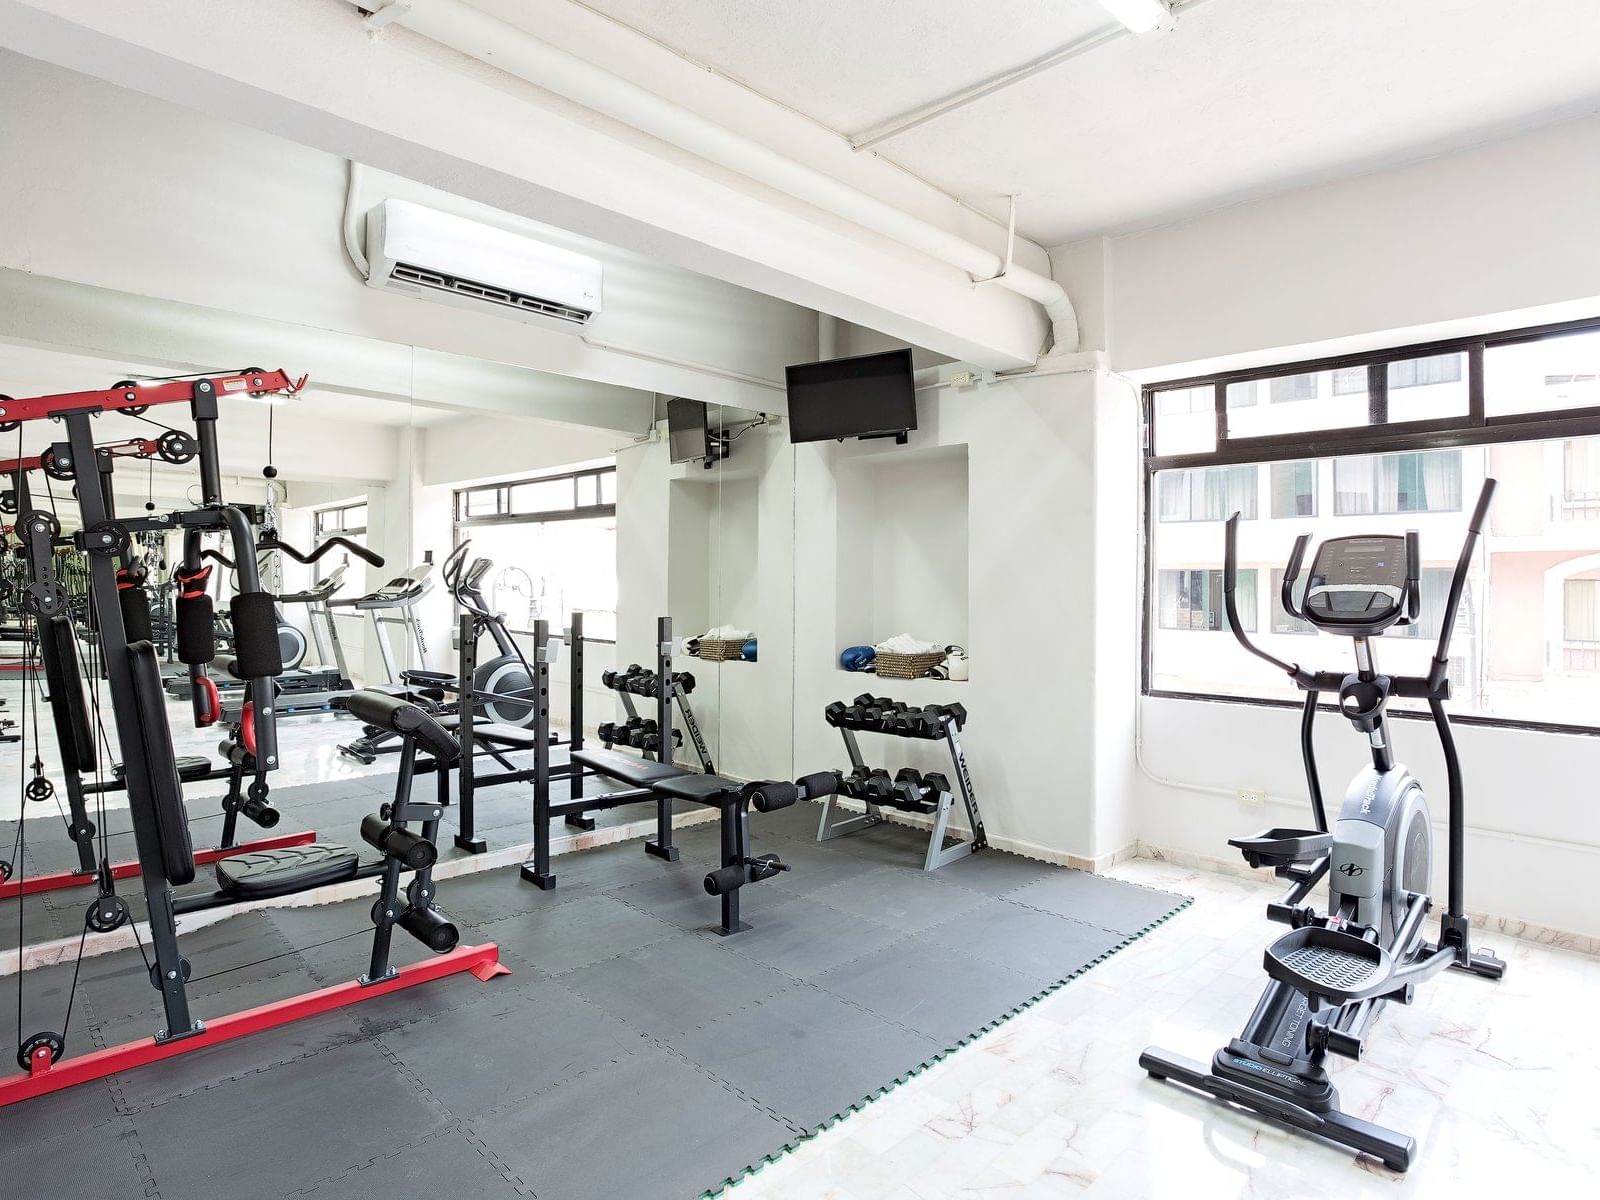 Exercise machines in the fitness center at Gamma Hotels